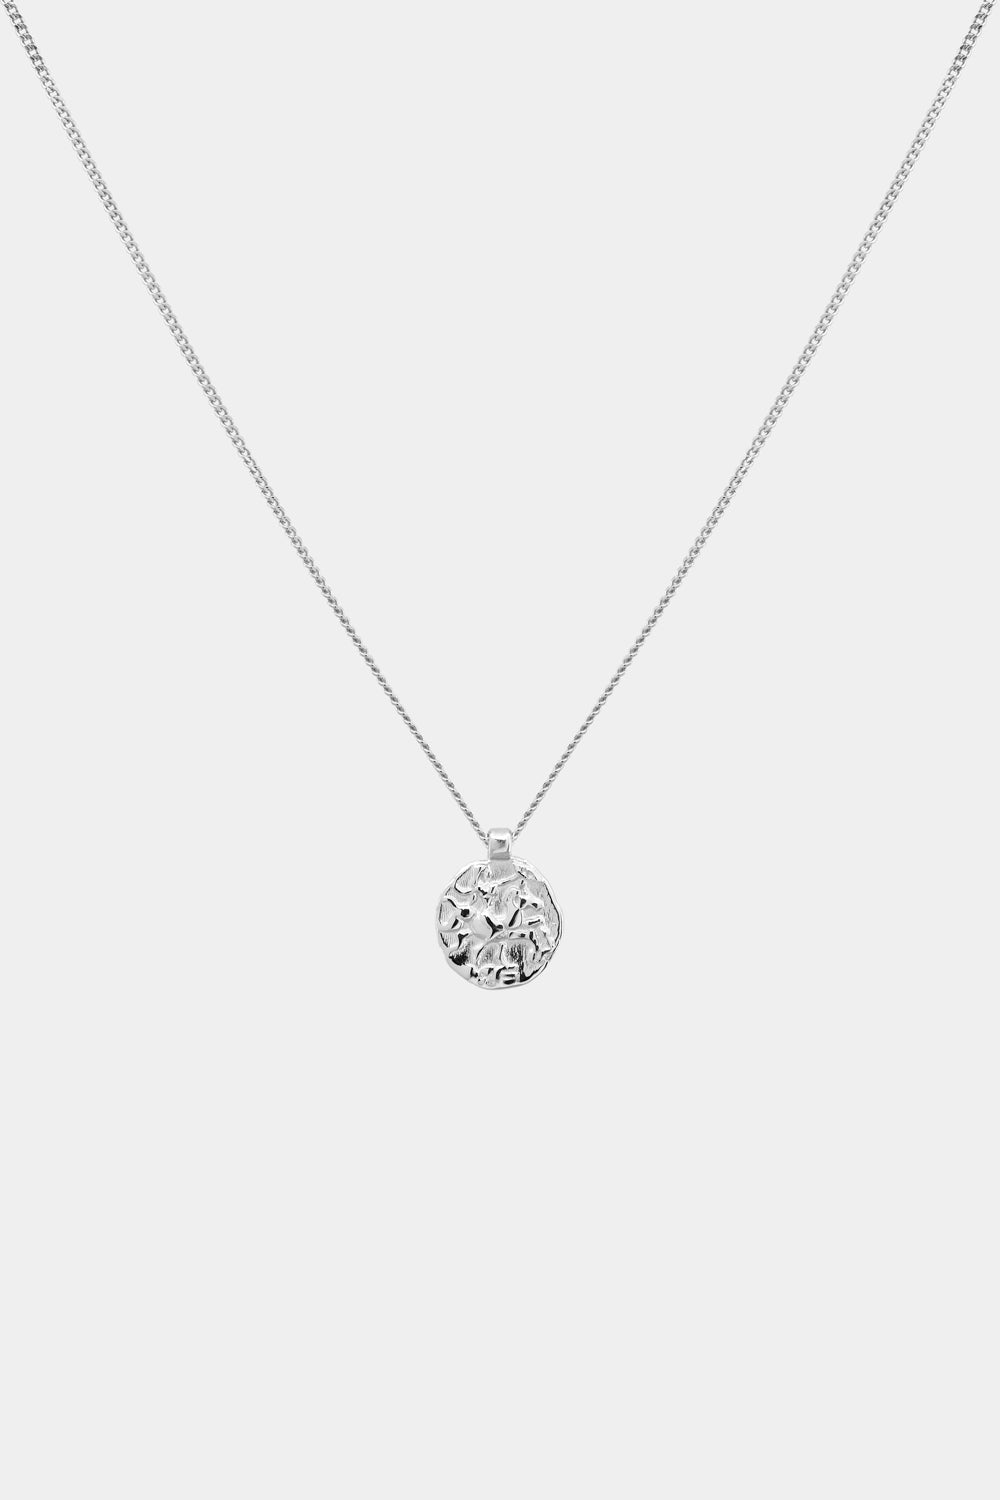 Mini Coin Necklace | Silver or 9K White Gold, More Options Available